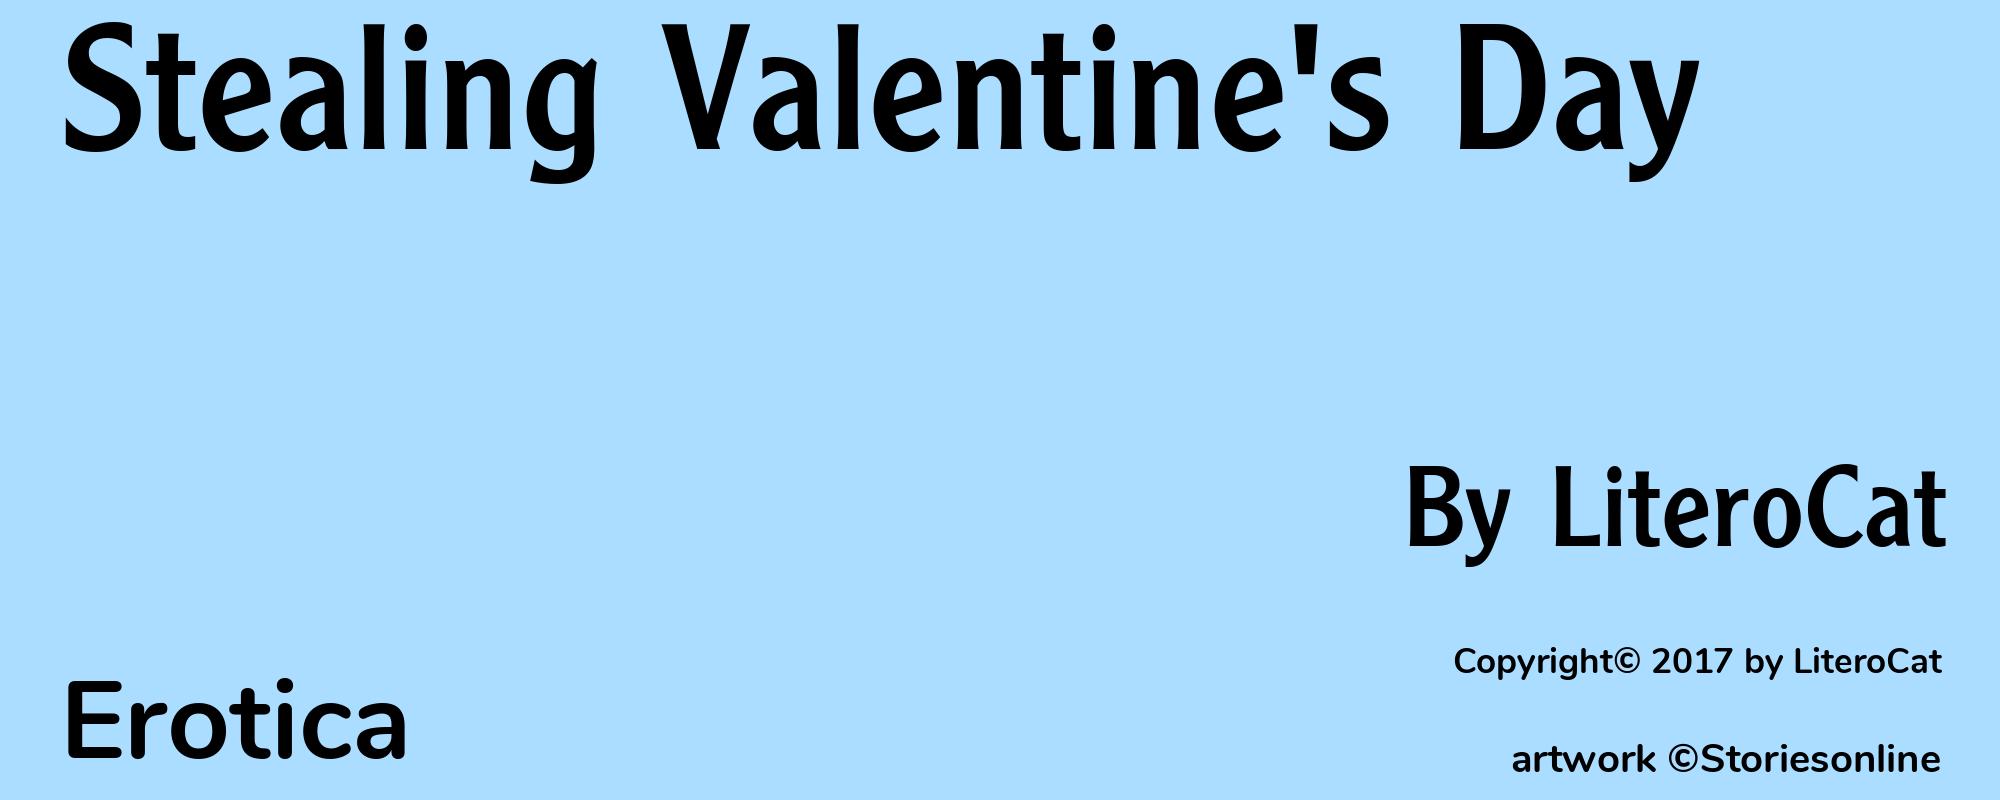 Stealing Valentine's Day - Cover